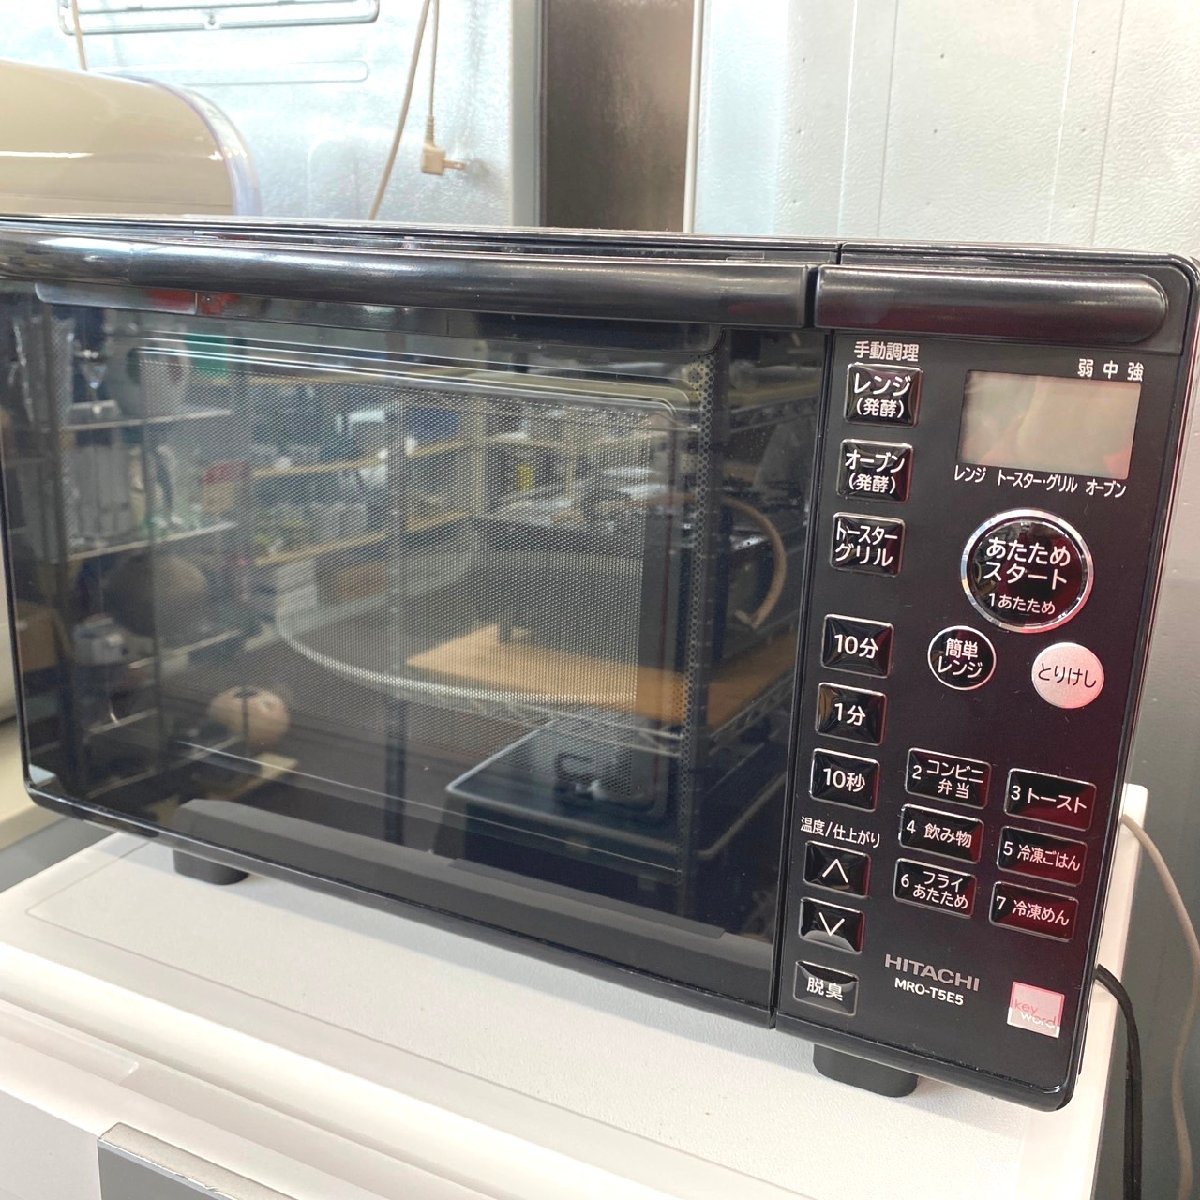 *HITACHI microwave oven MRO-T5E5 2020 year made /USED τ*